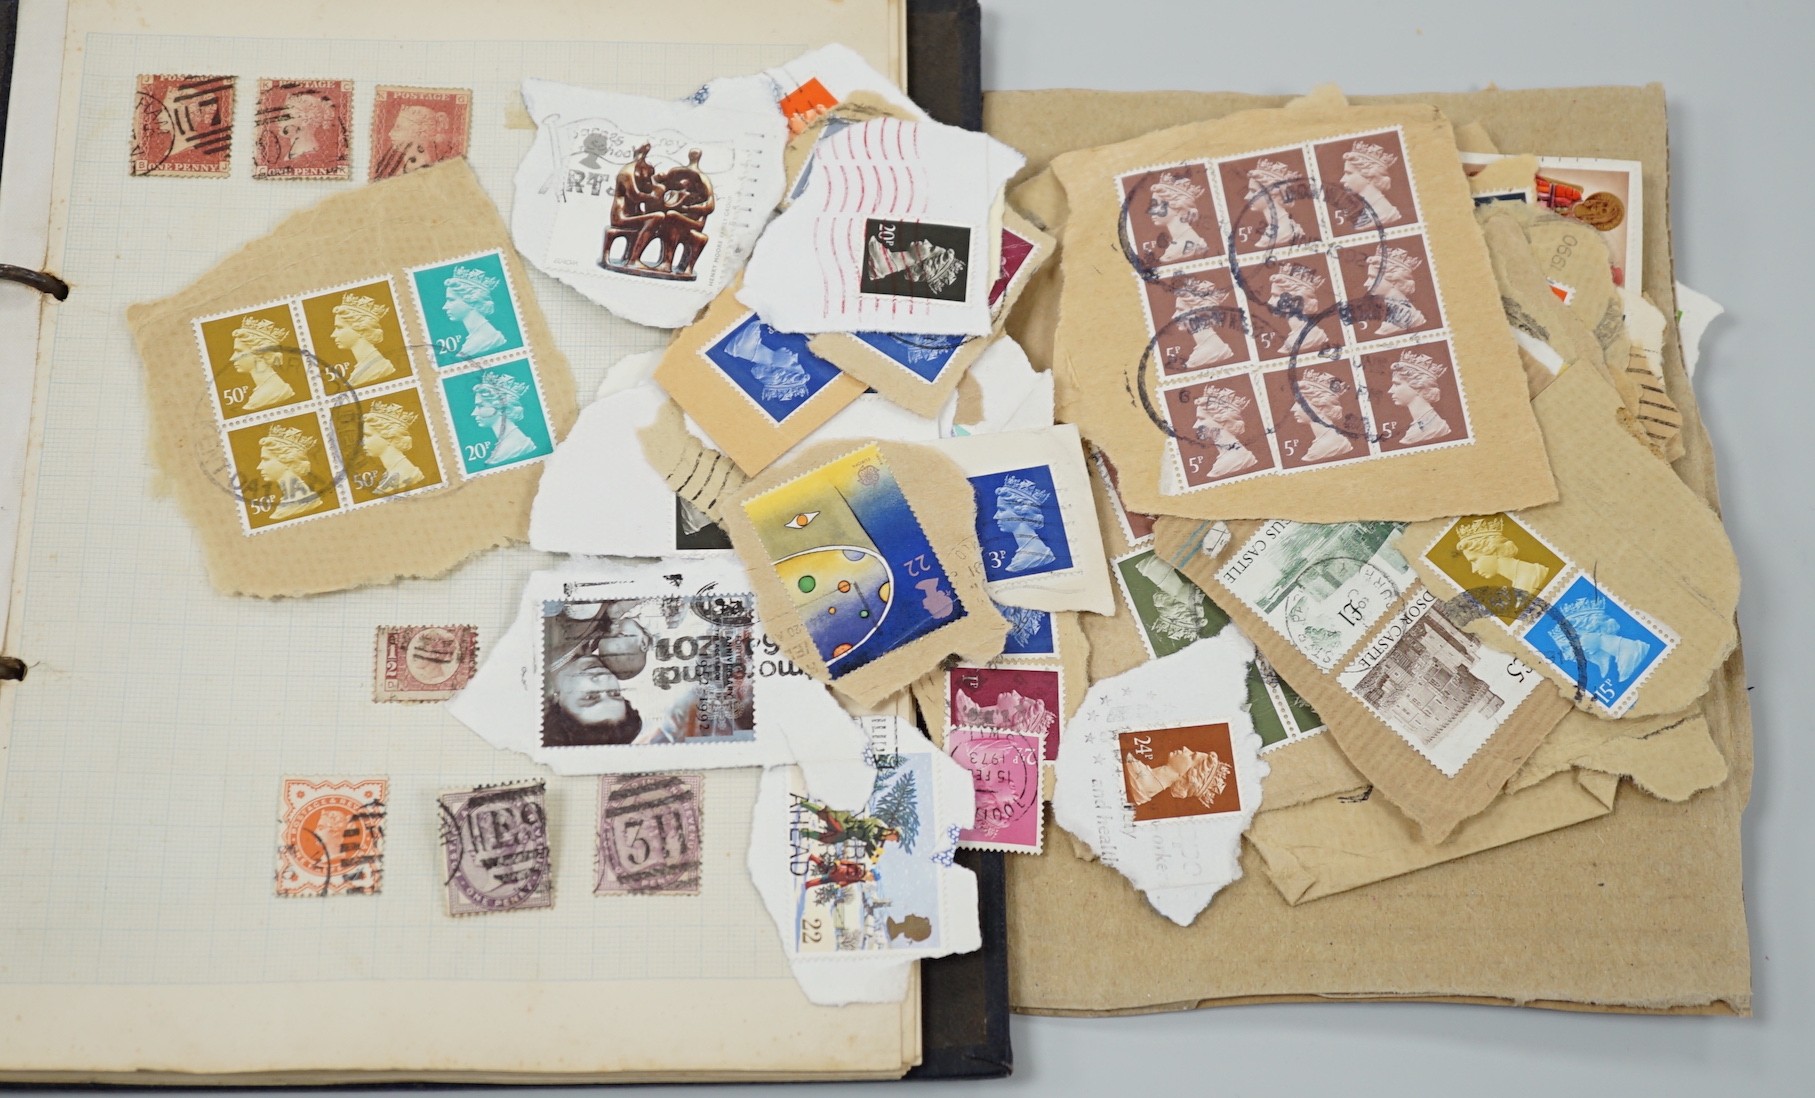 World stamps in 7 albums and stock books, A Barbados cover and other covers